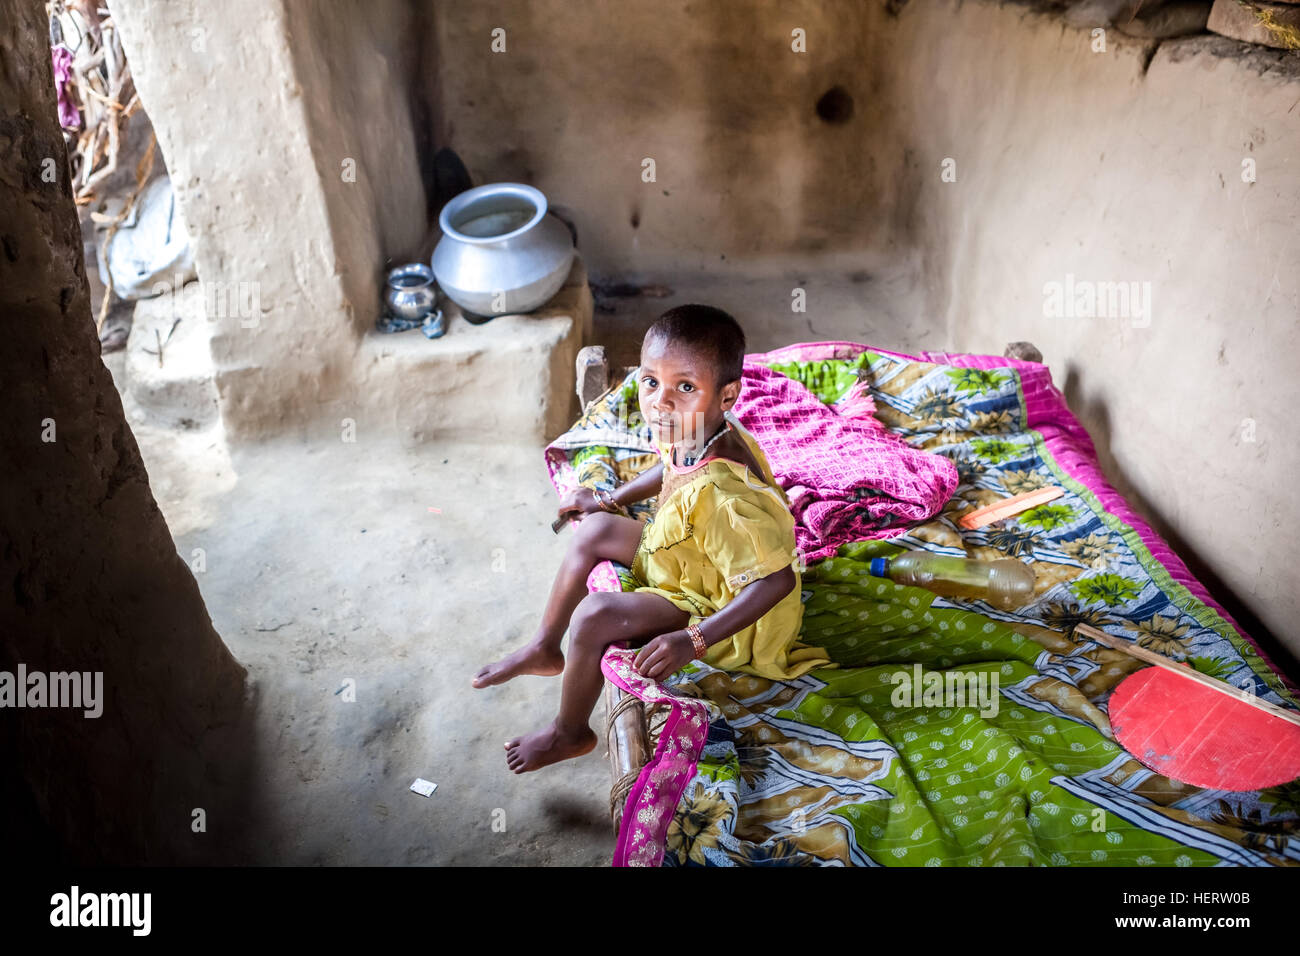 Portrait of a child inside her room in Faldu agricultural village, Nawada district, Bihar, India. Stock Photo